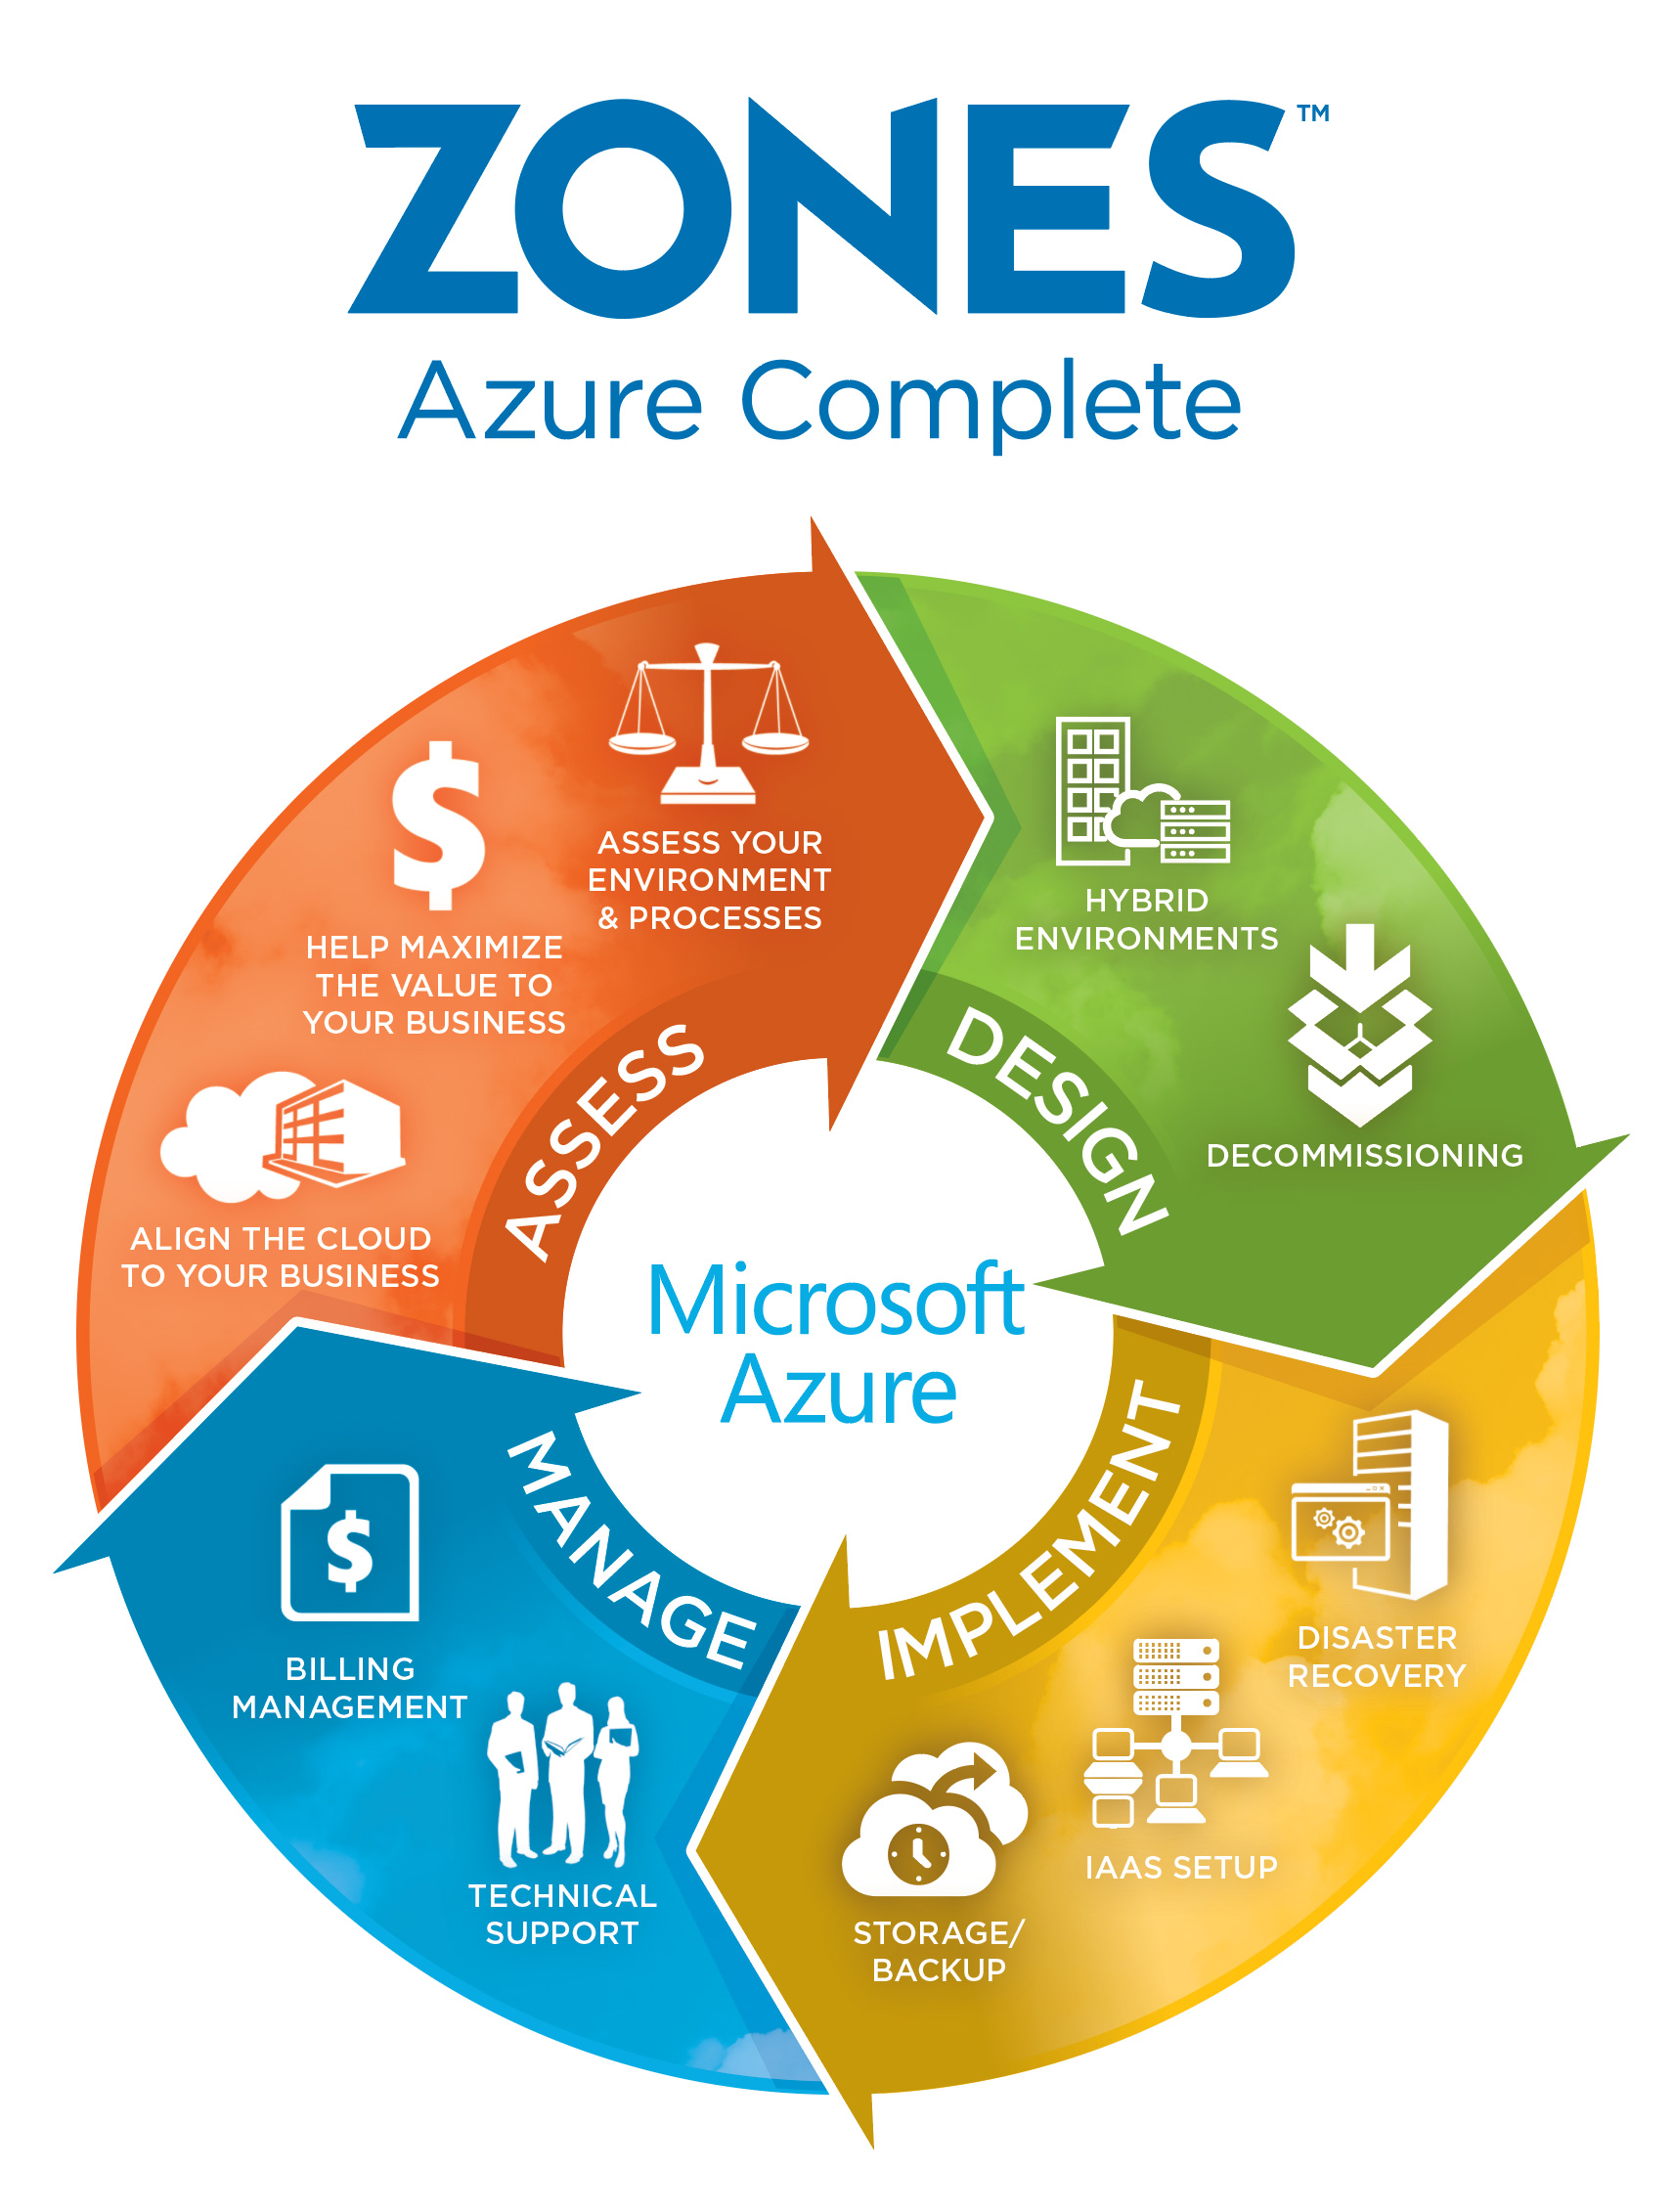 Modernize your business with Zones Azure Complete